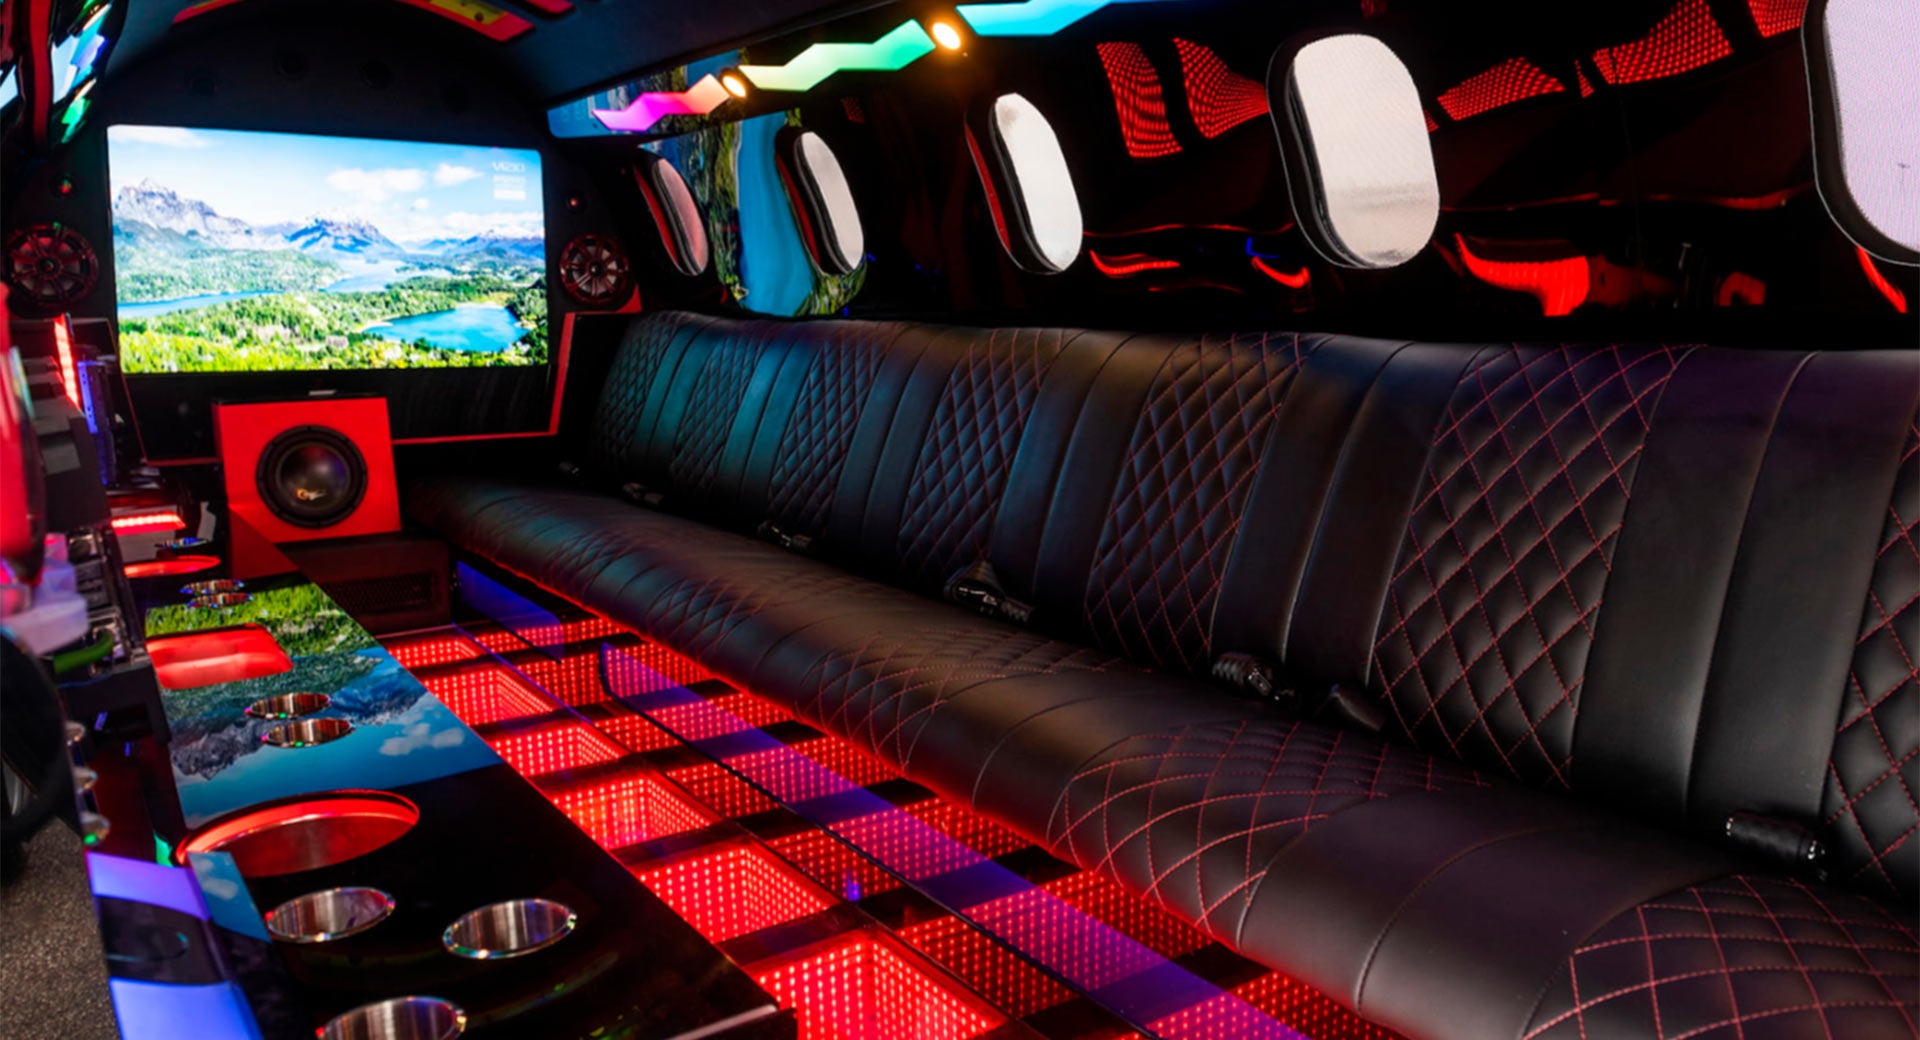 A Mitsubishi Dealership Is Selling a Wonderfully Ridiculous Learjet Limo